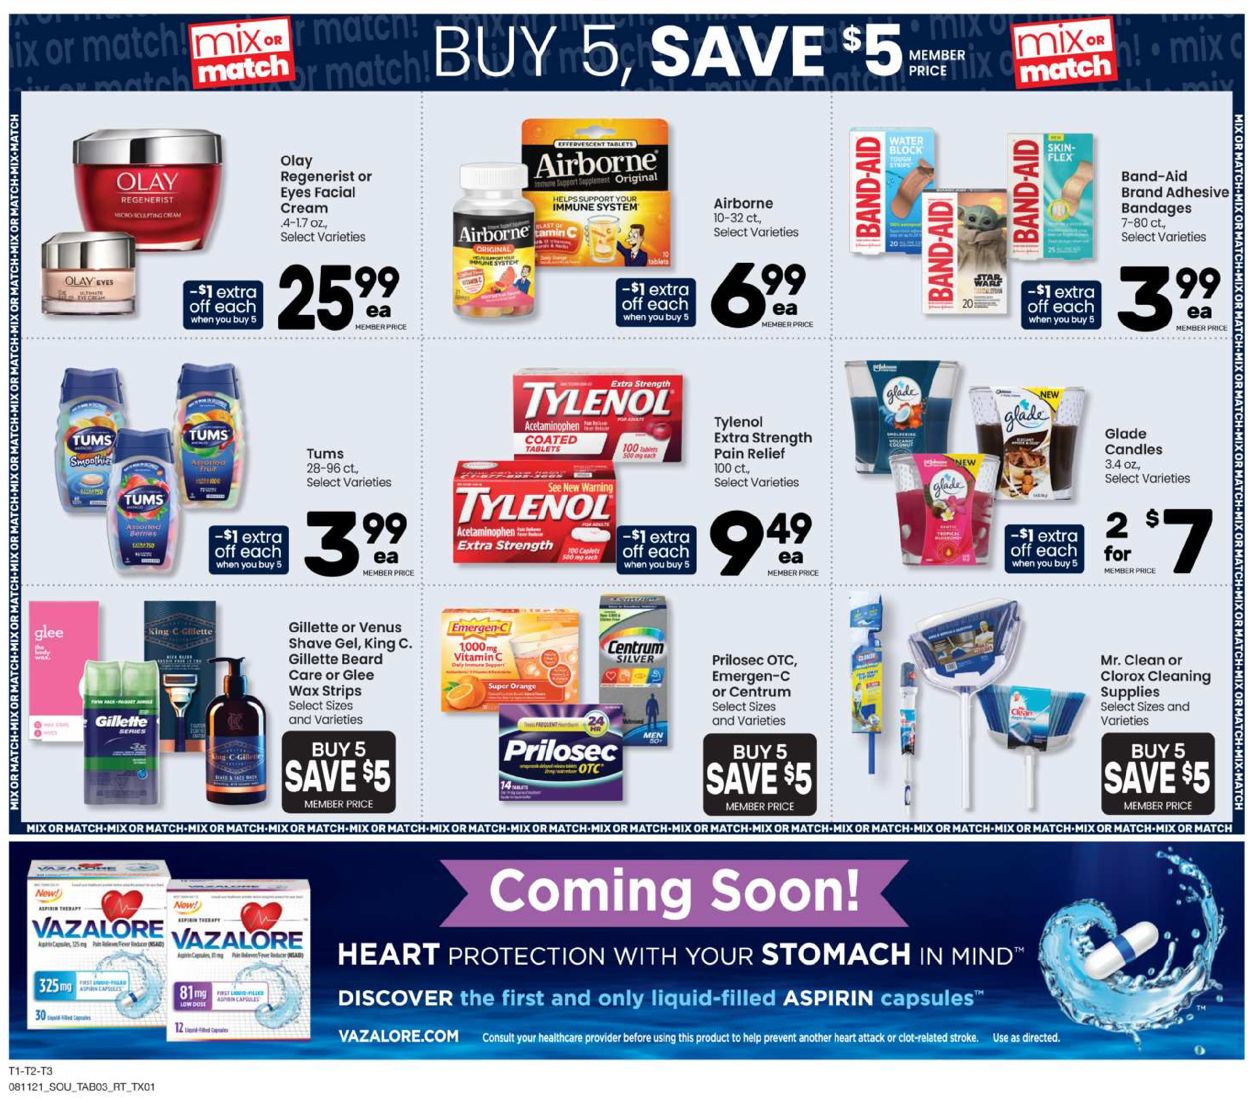 Randalls Ad from 08/11/2021